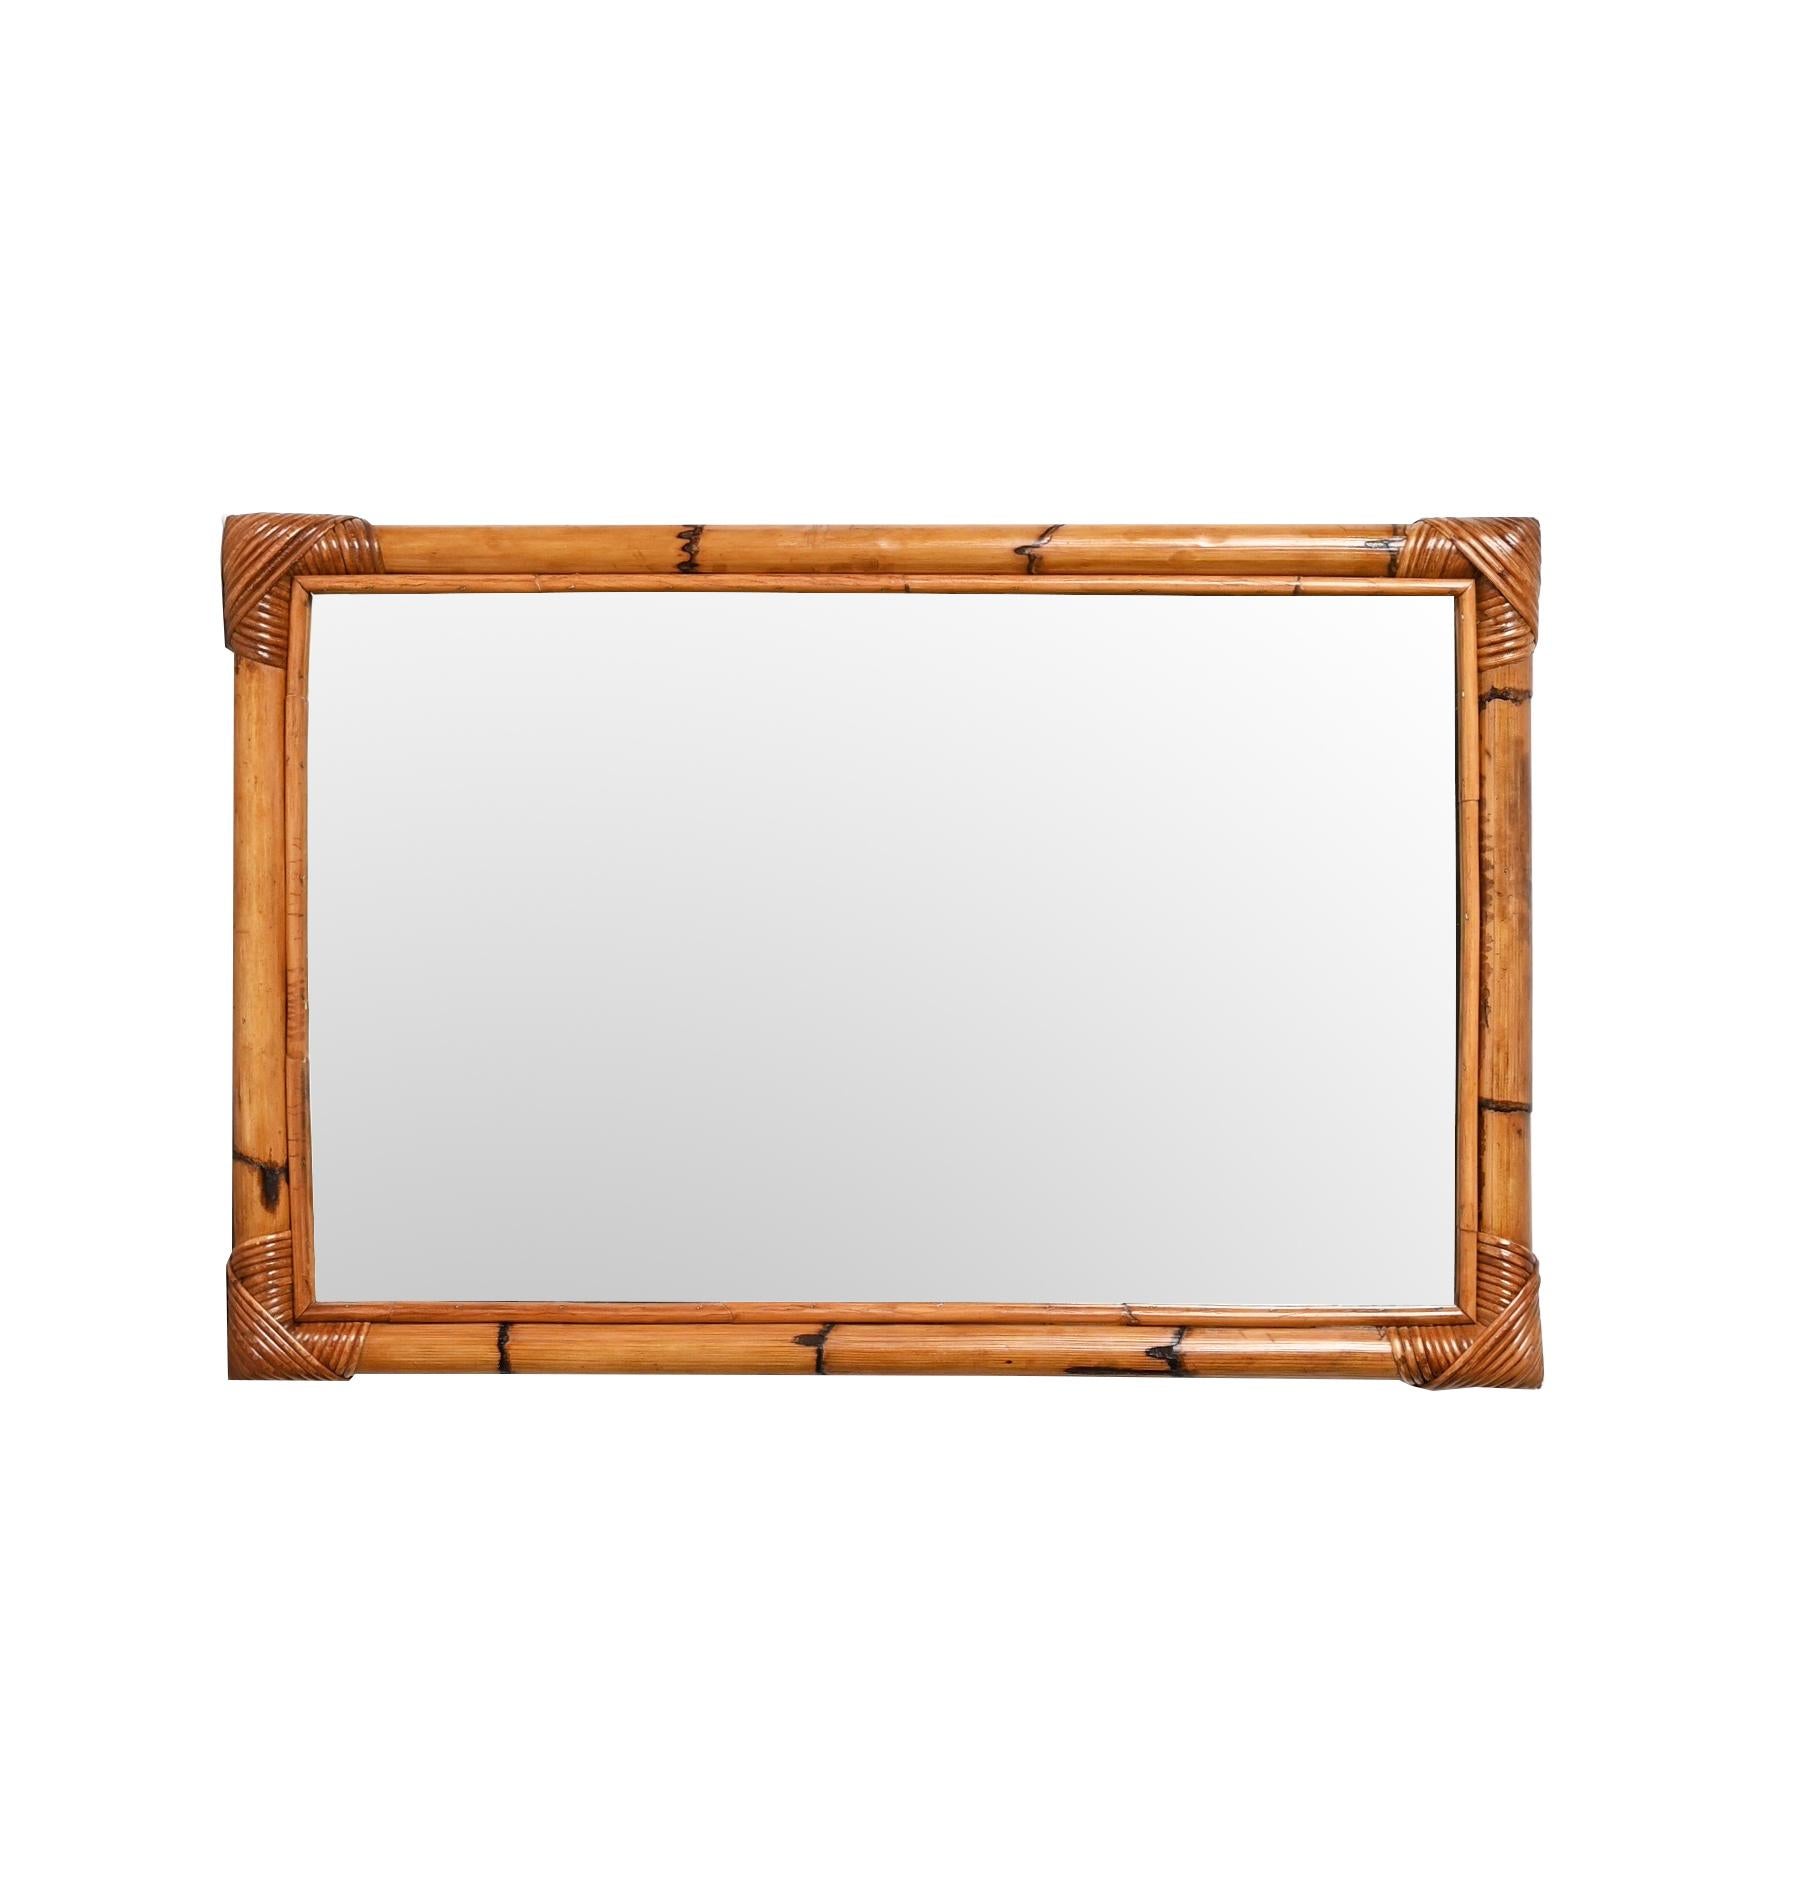 Mid-Century Modern Midcentury Rectangular Italian Mirror with Double Bamboo Cane Frame, 1970s For Sale